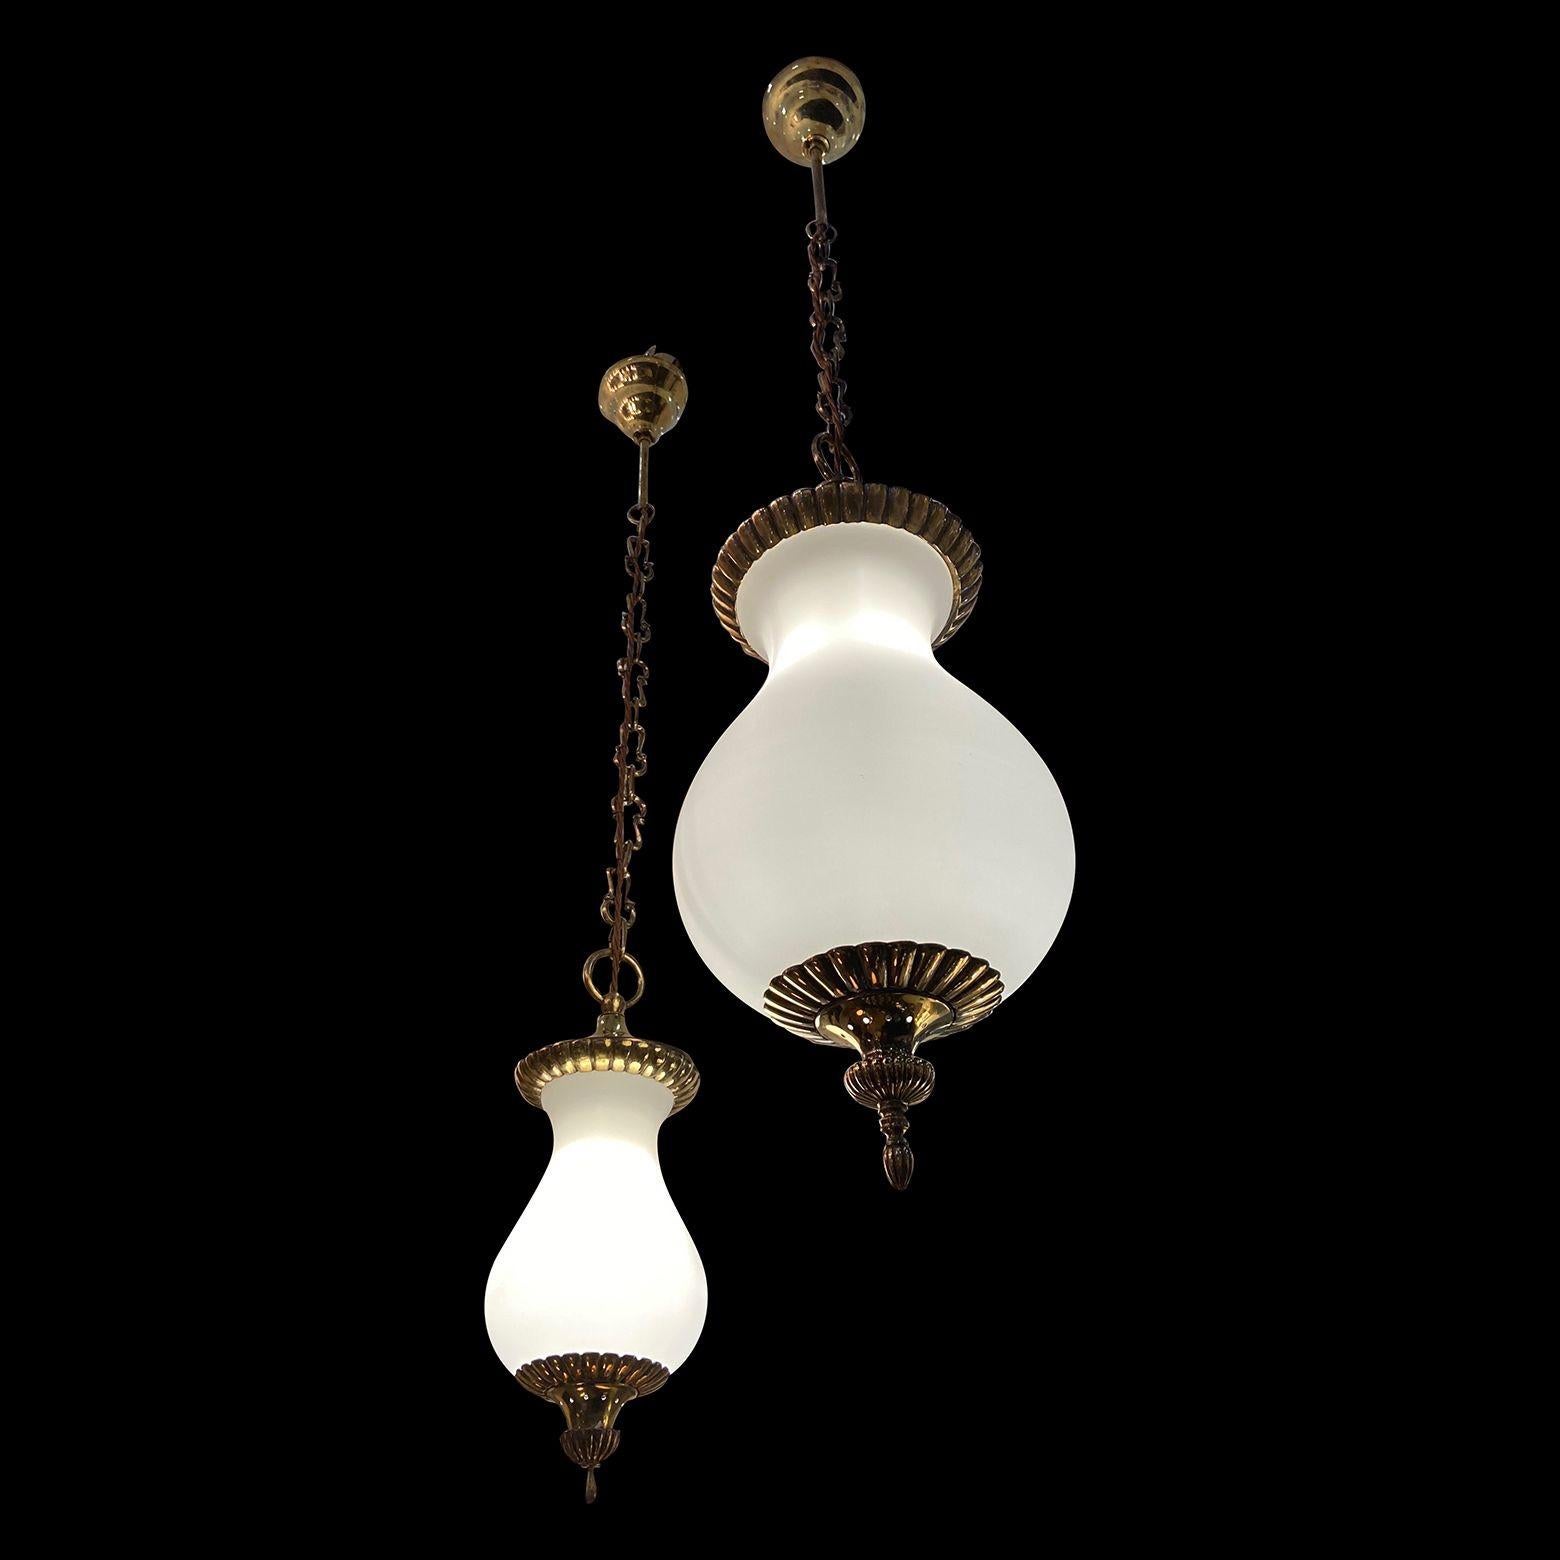 One large and one small glass and brass lanterns or pendant lights, sold as a pair. 
the brass is heavy and beautifully crafted.
Dimensions posted are of the large one.
The small one is 108cm (42 inches) long x 15cm ( 6 inches) diameter.
Chain could